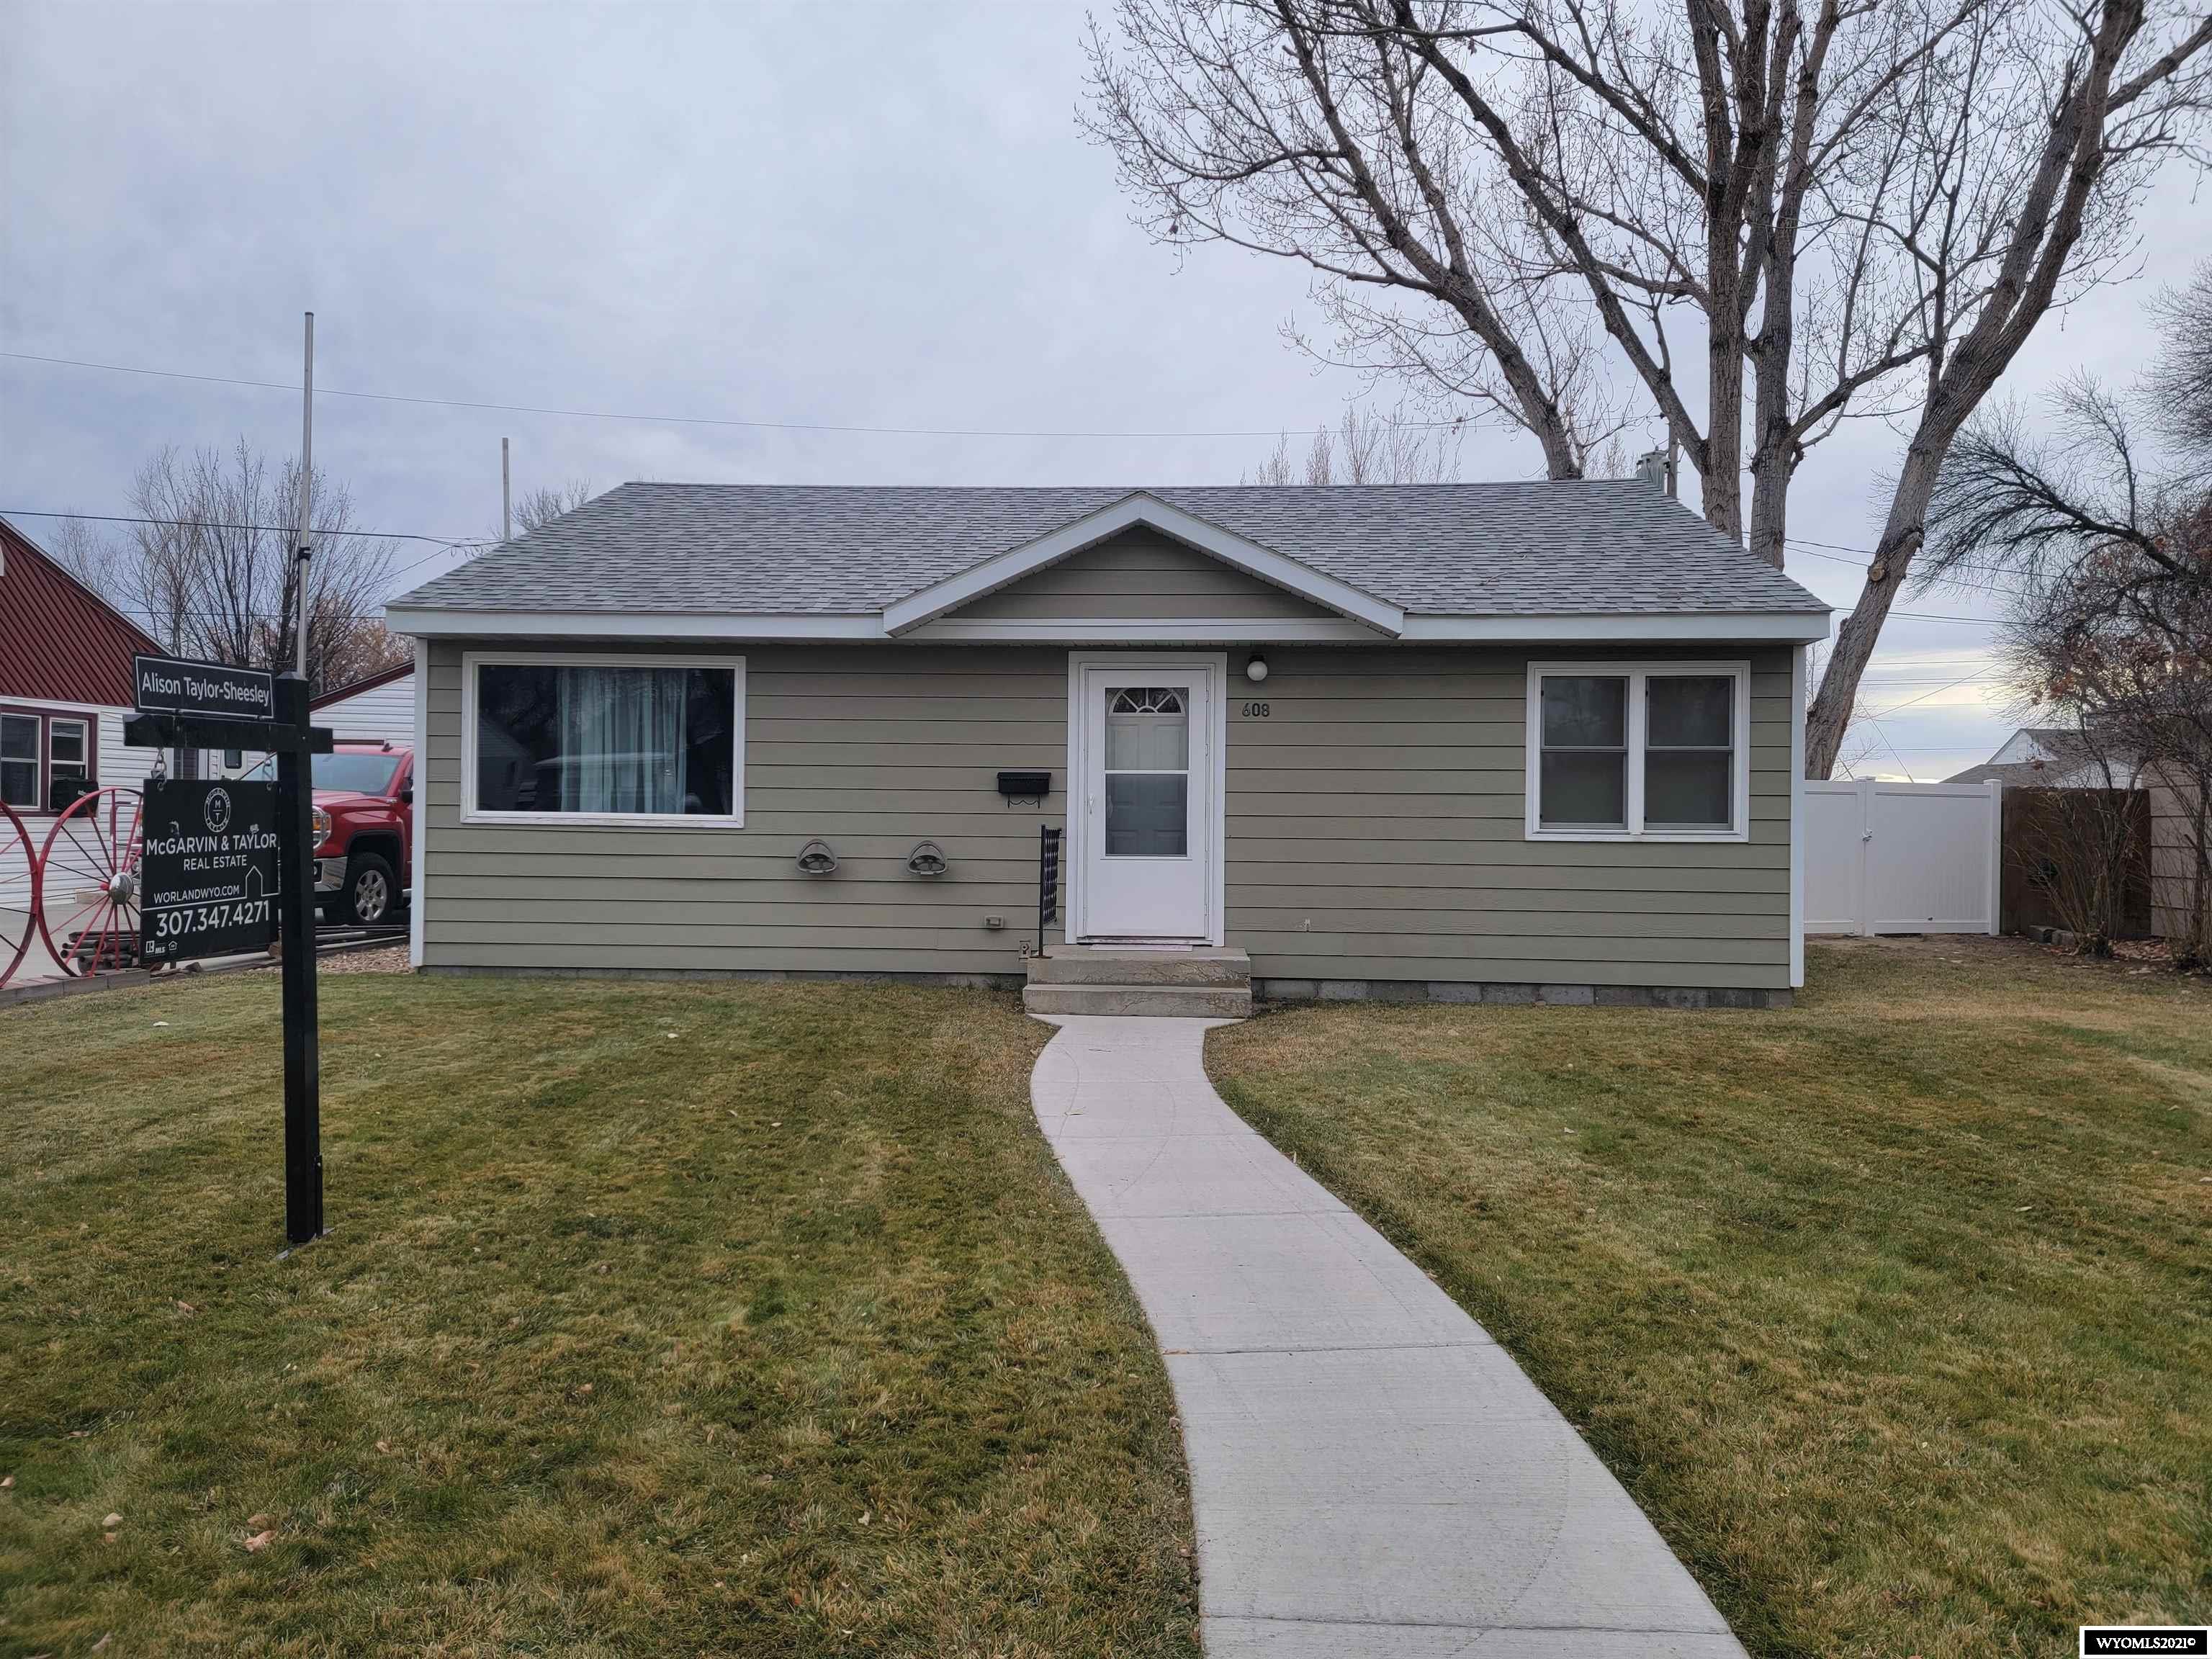 Cute 2 bedroom, 1 bath home.  New Siding, New Roof, Newer Windows,  6' Vinyl Fence, Nice Yard.  Would make a great starter home or rental.   Call this won't last long